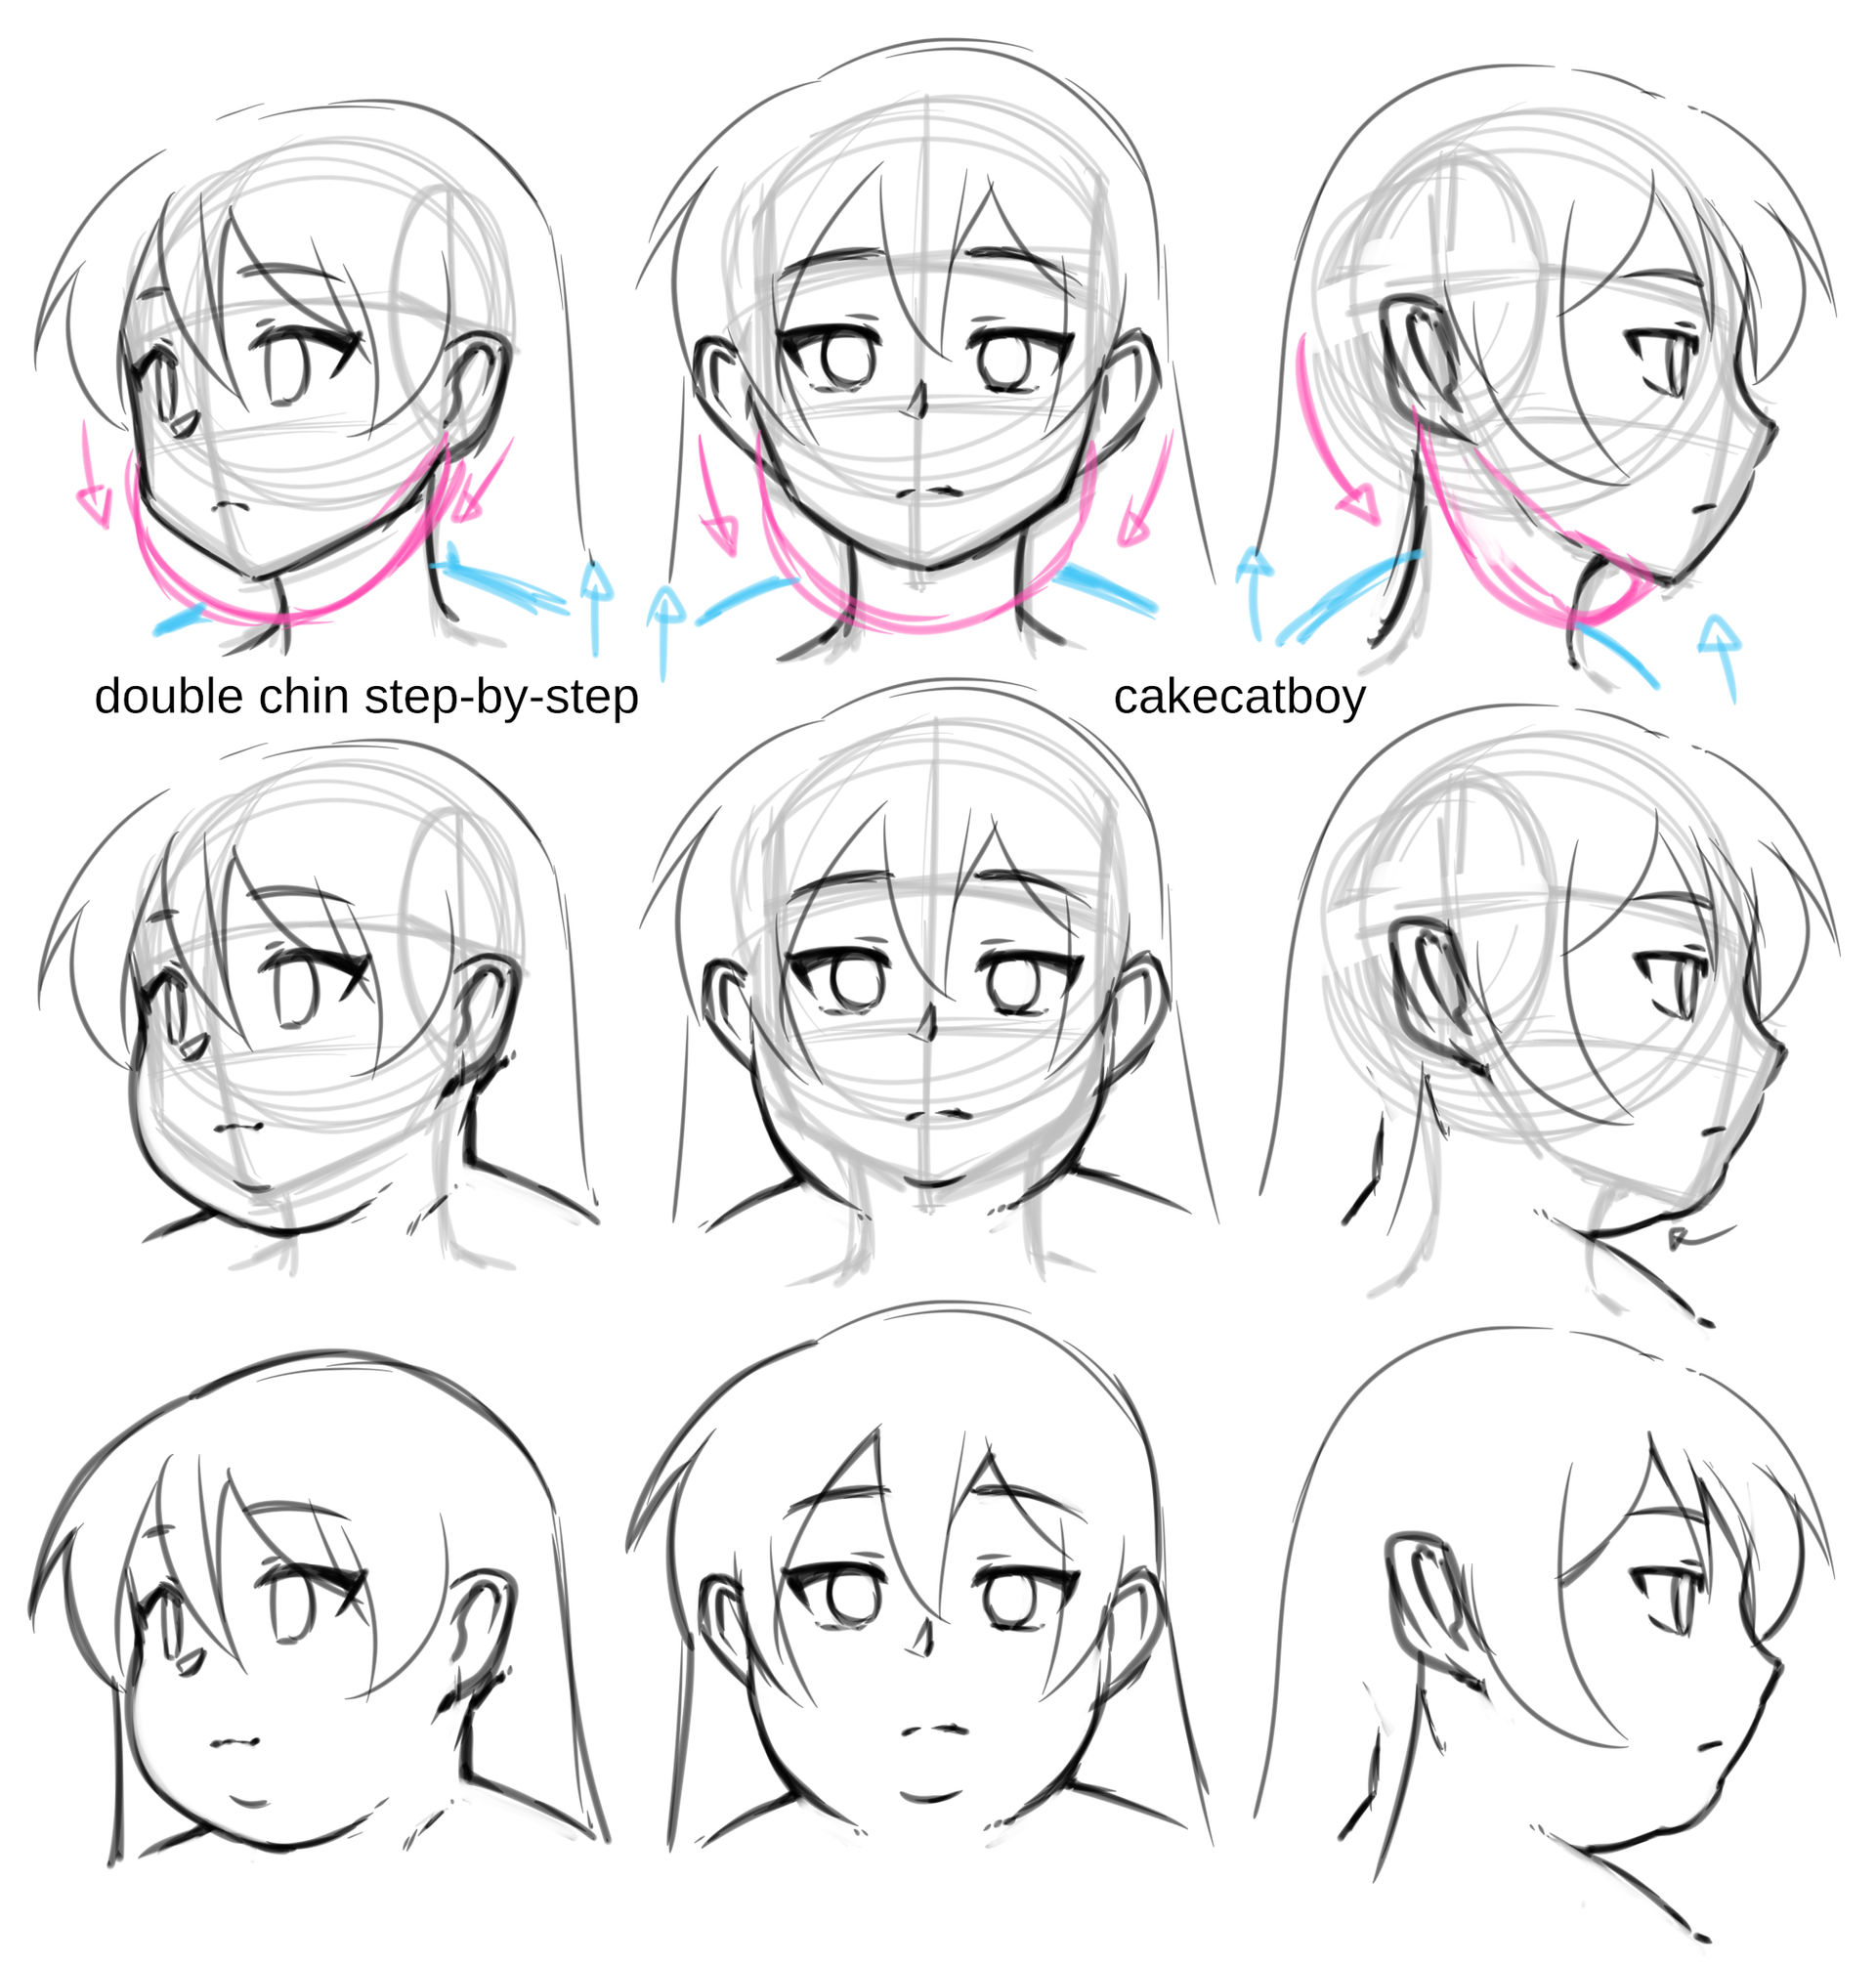 How to Draw Double Chin Guide by catboymech on DeviantArt